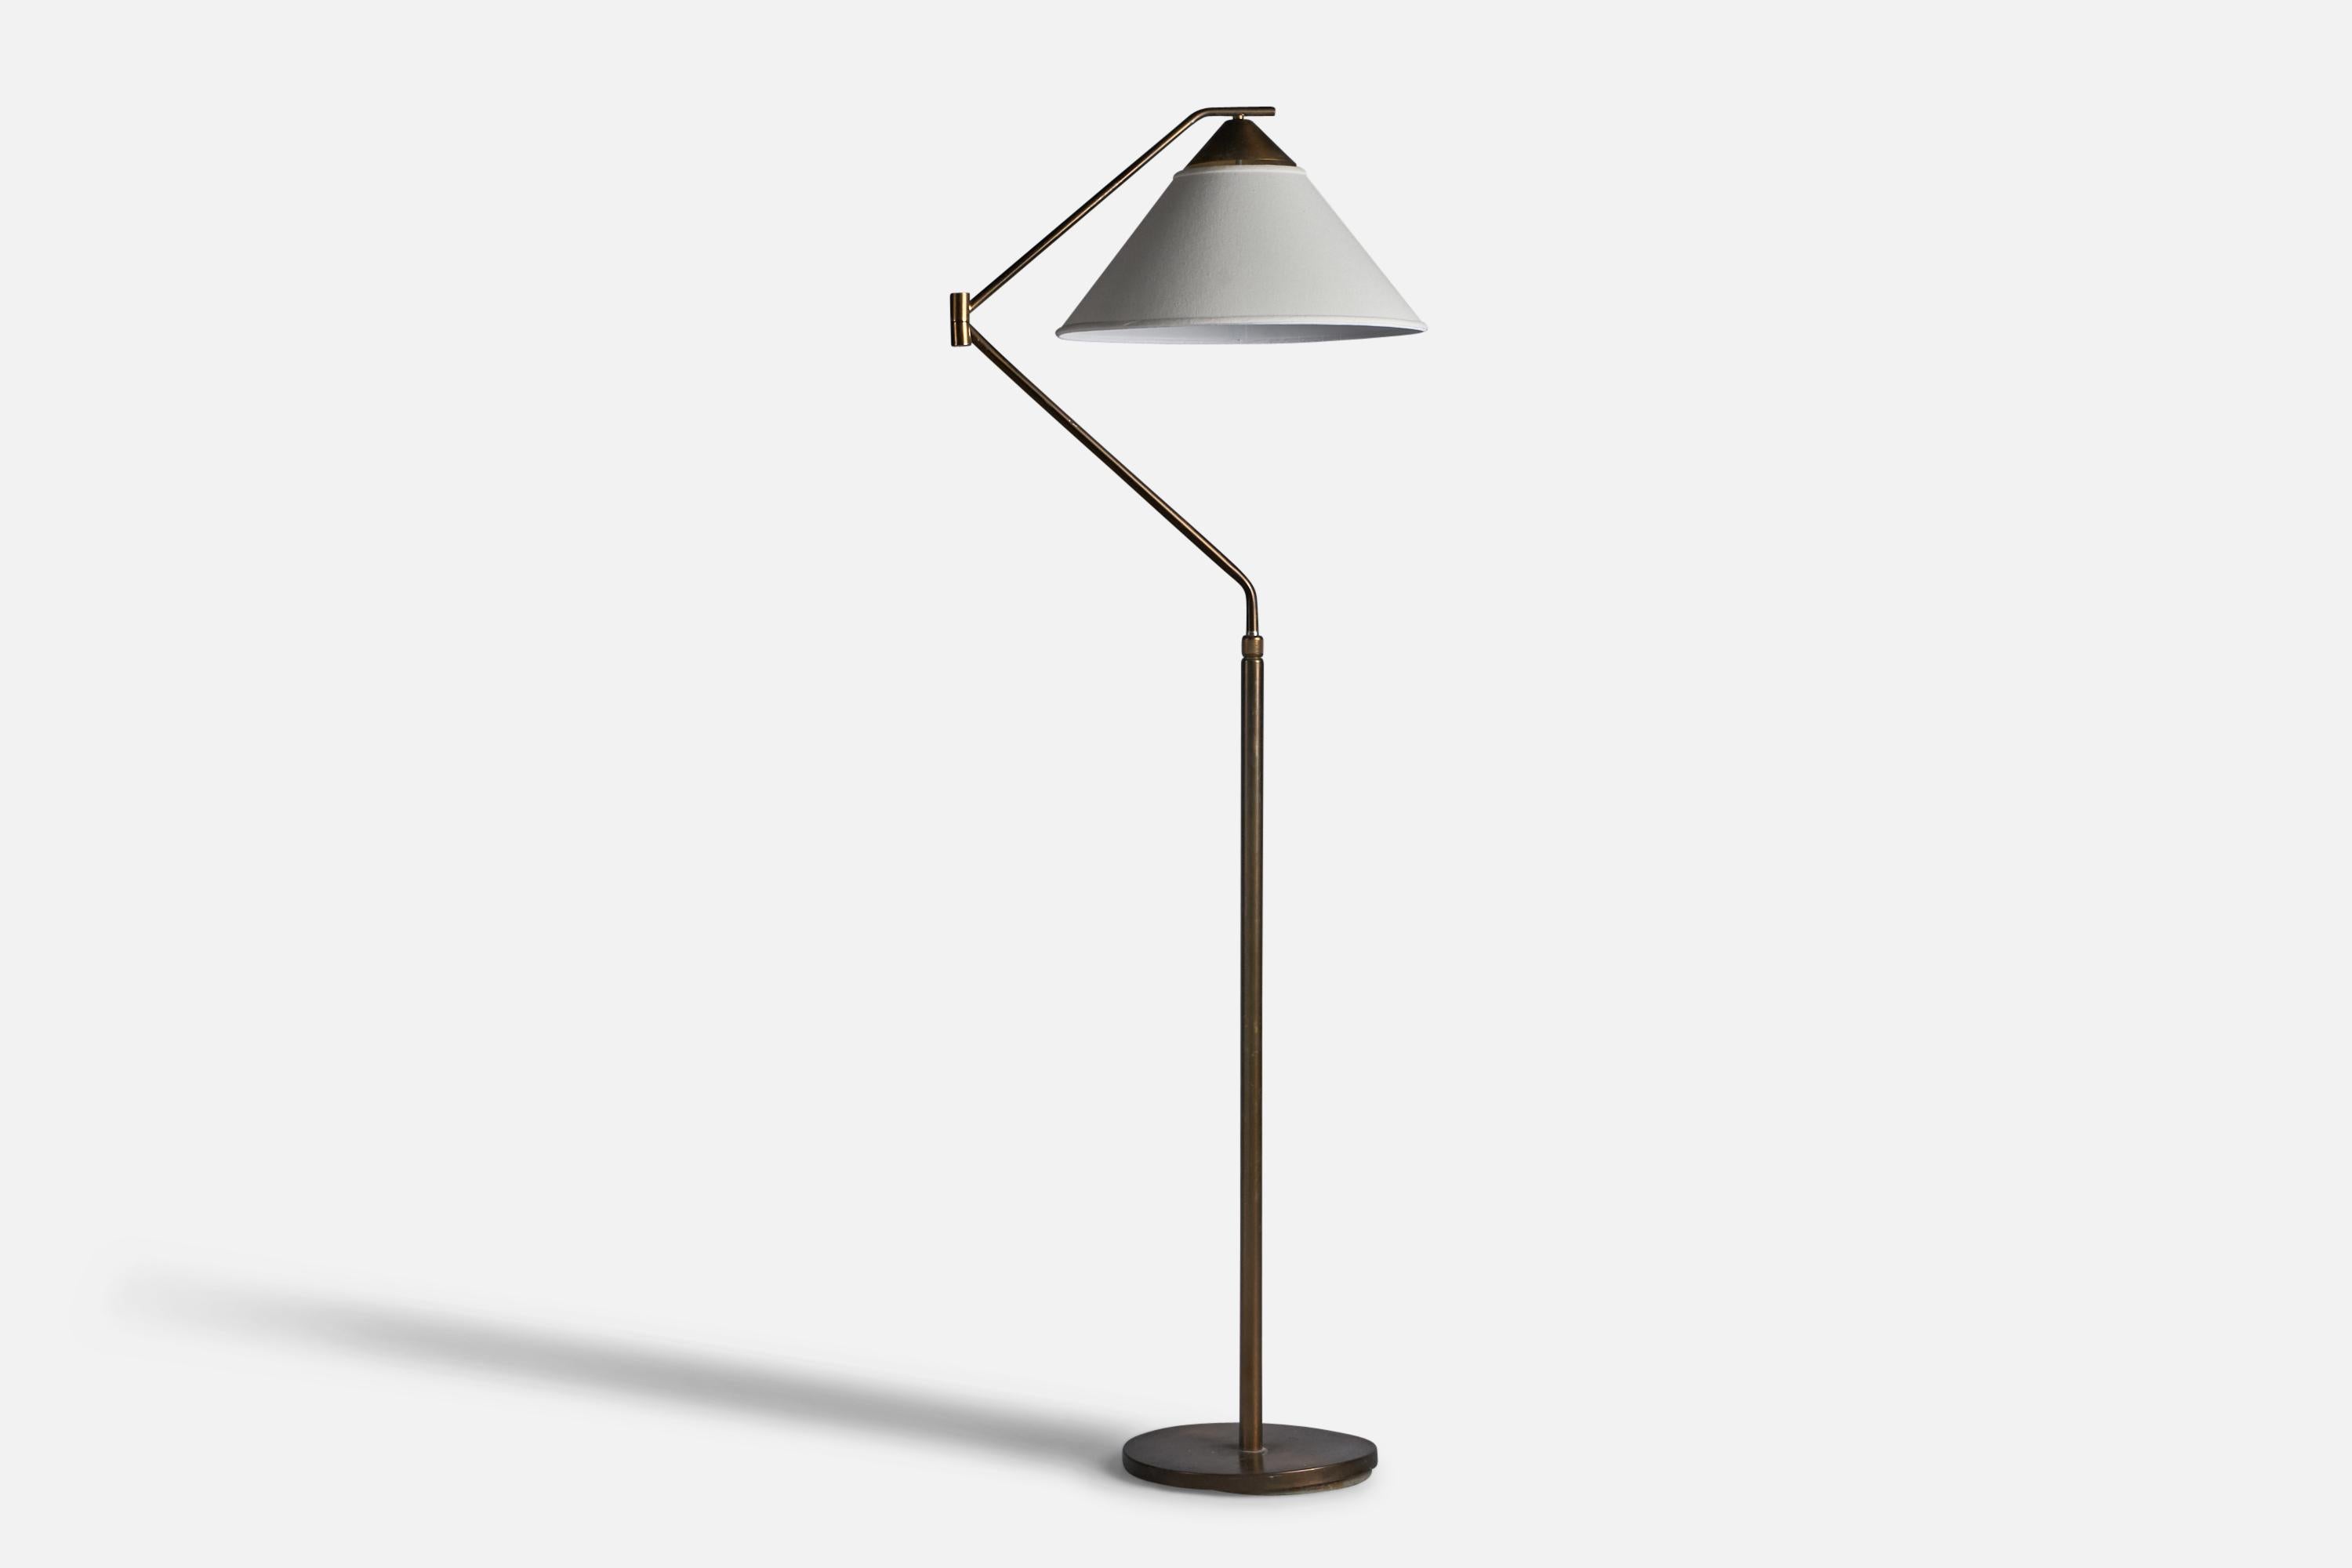 An adjustable brass and white fabric floor lamp designed and produced in Italy, c. 1940s.

Overall Dimensions (inches): 67